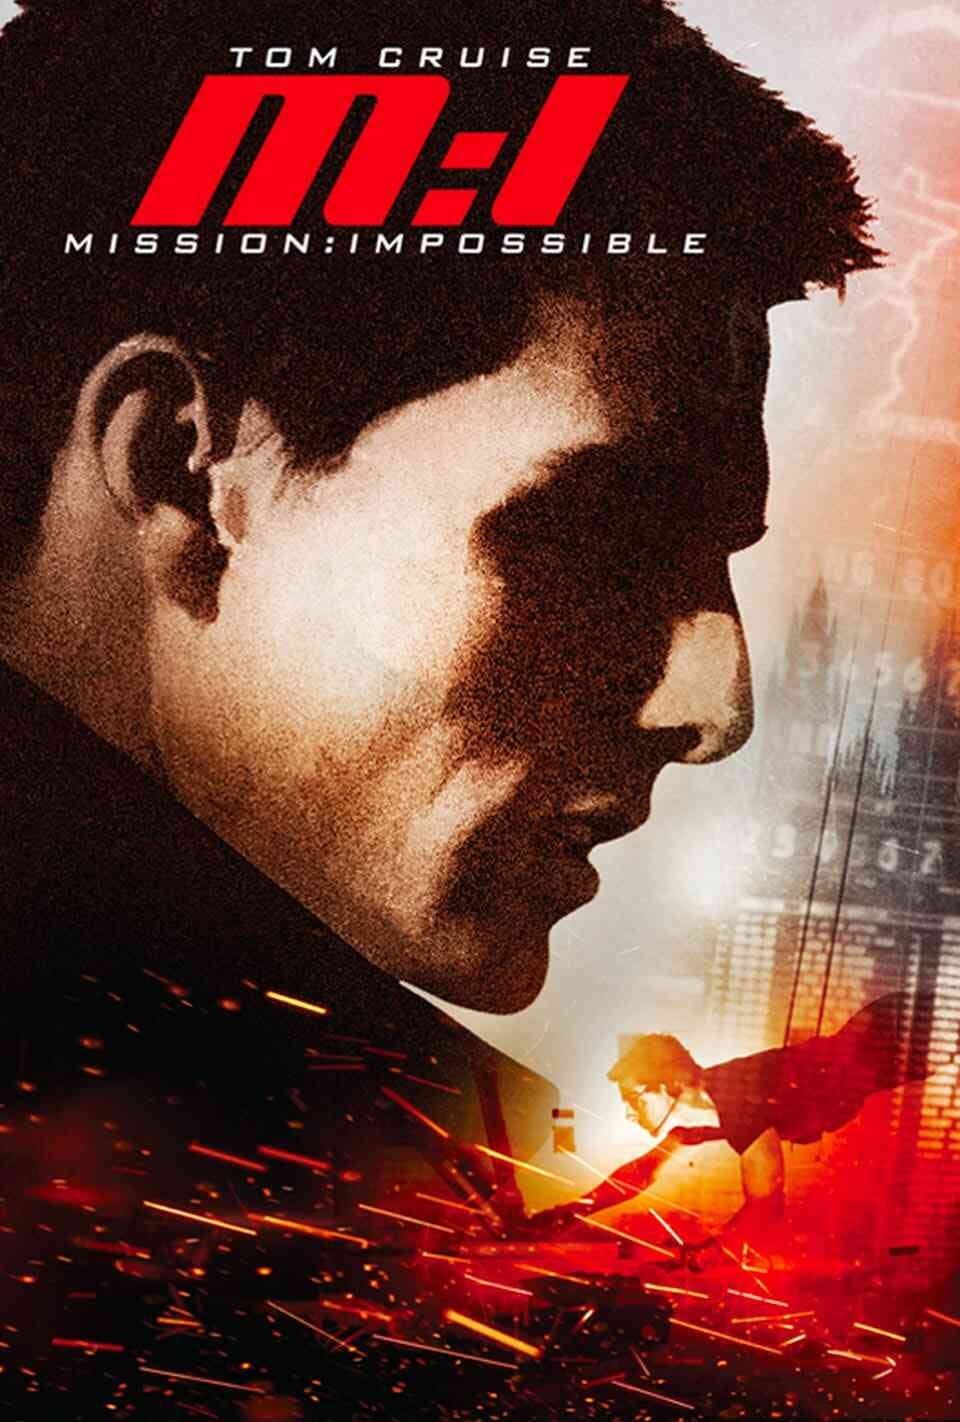 Read Impossible screenplay (poster)